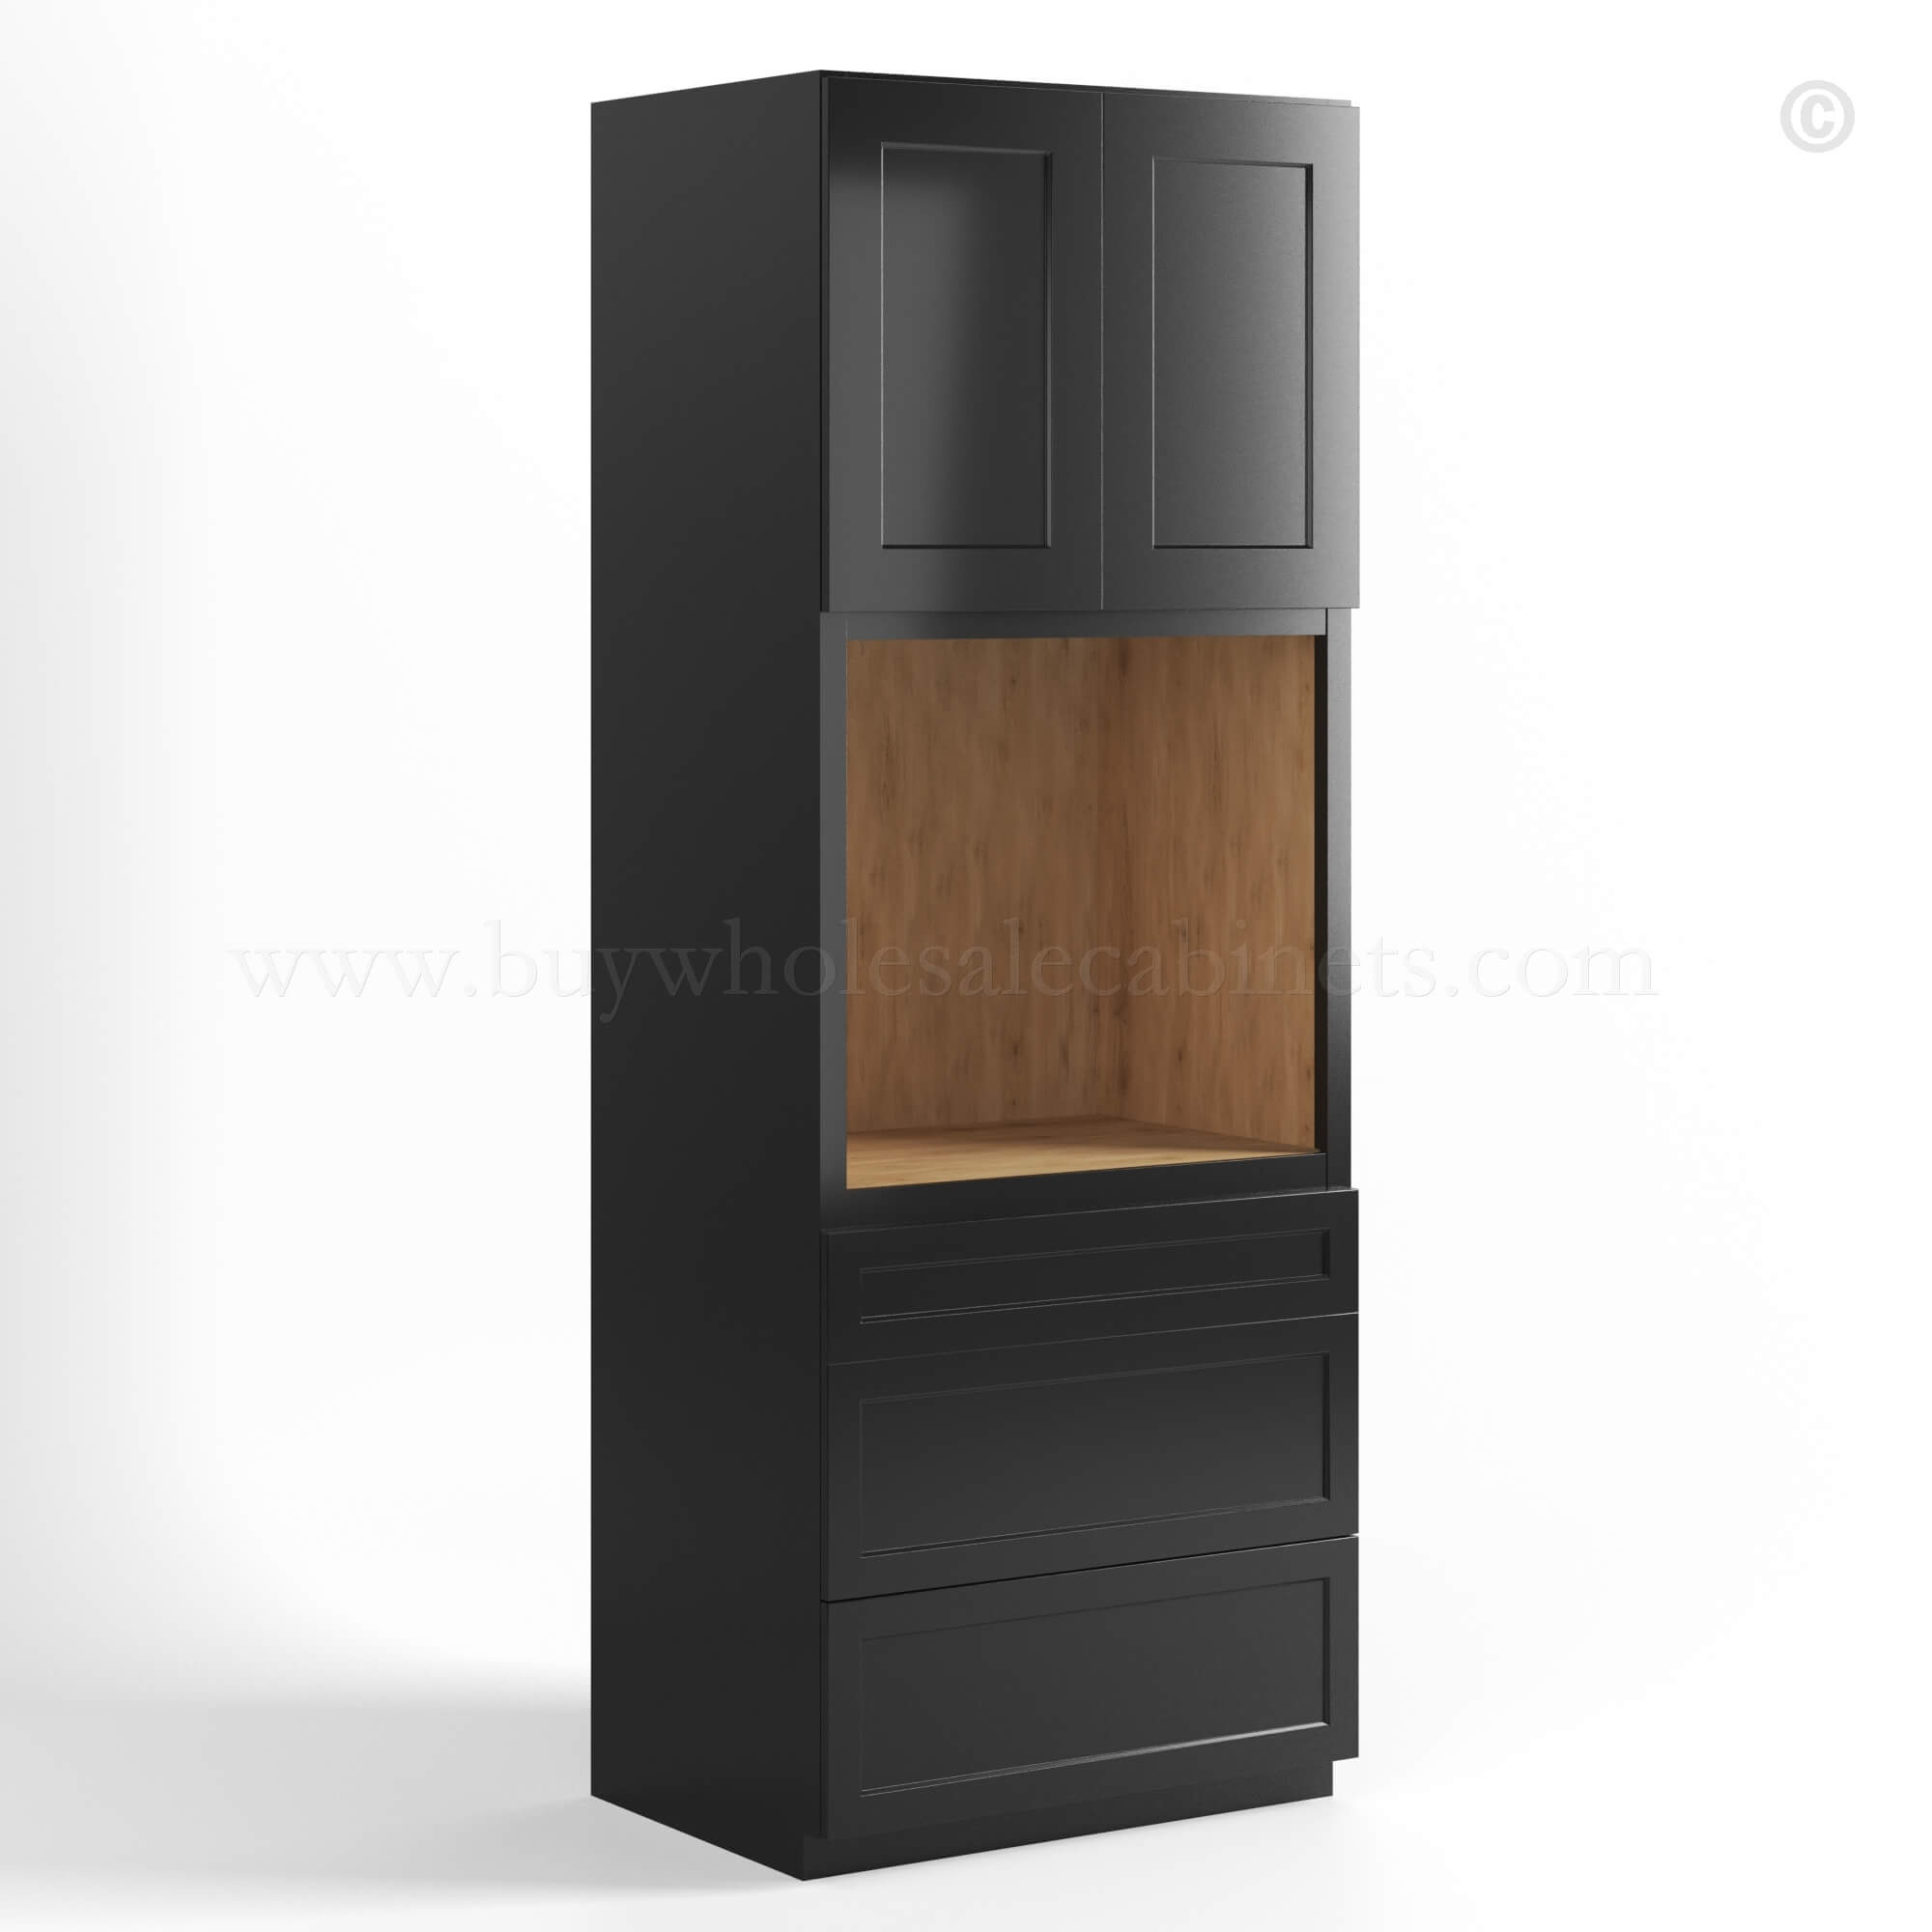 Black Shaker Tall Universal Oven Cabinet, rta cabinets, wholesale cabinets